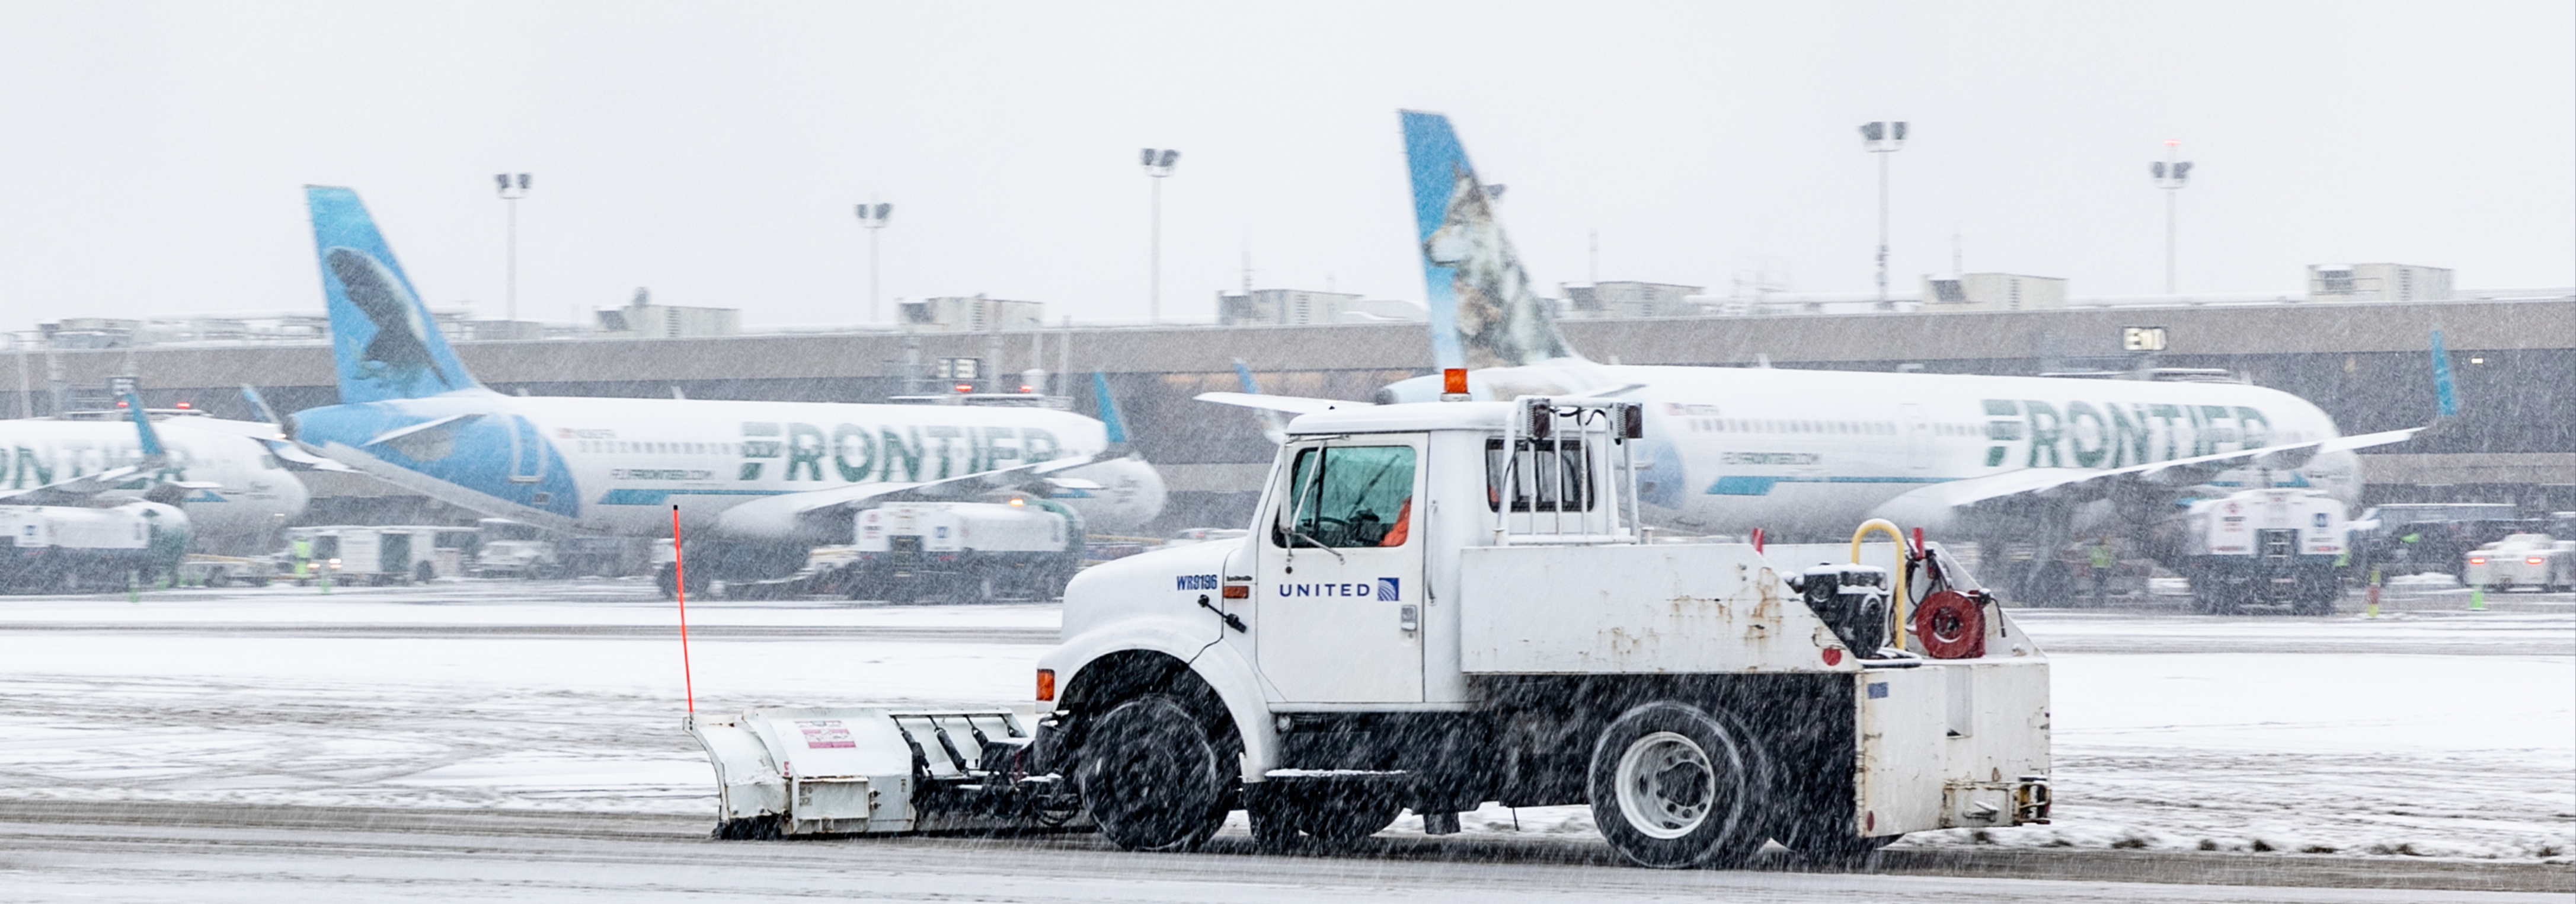 Frontier planes on airfield in the snow